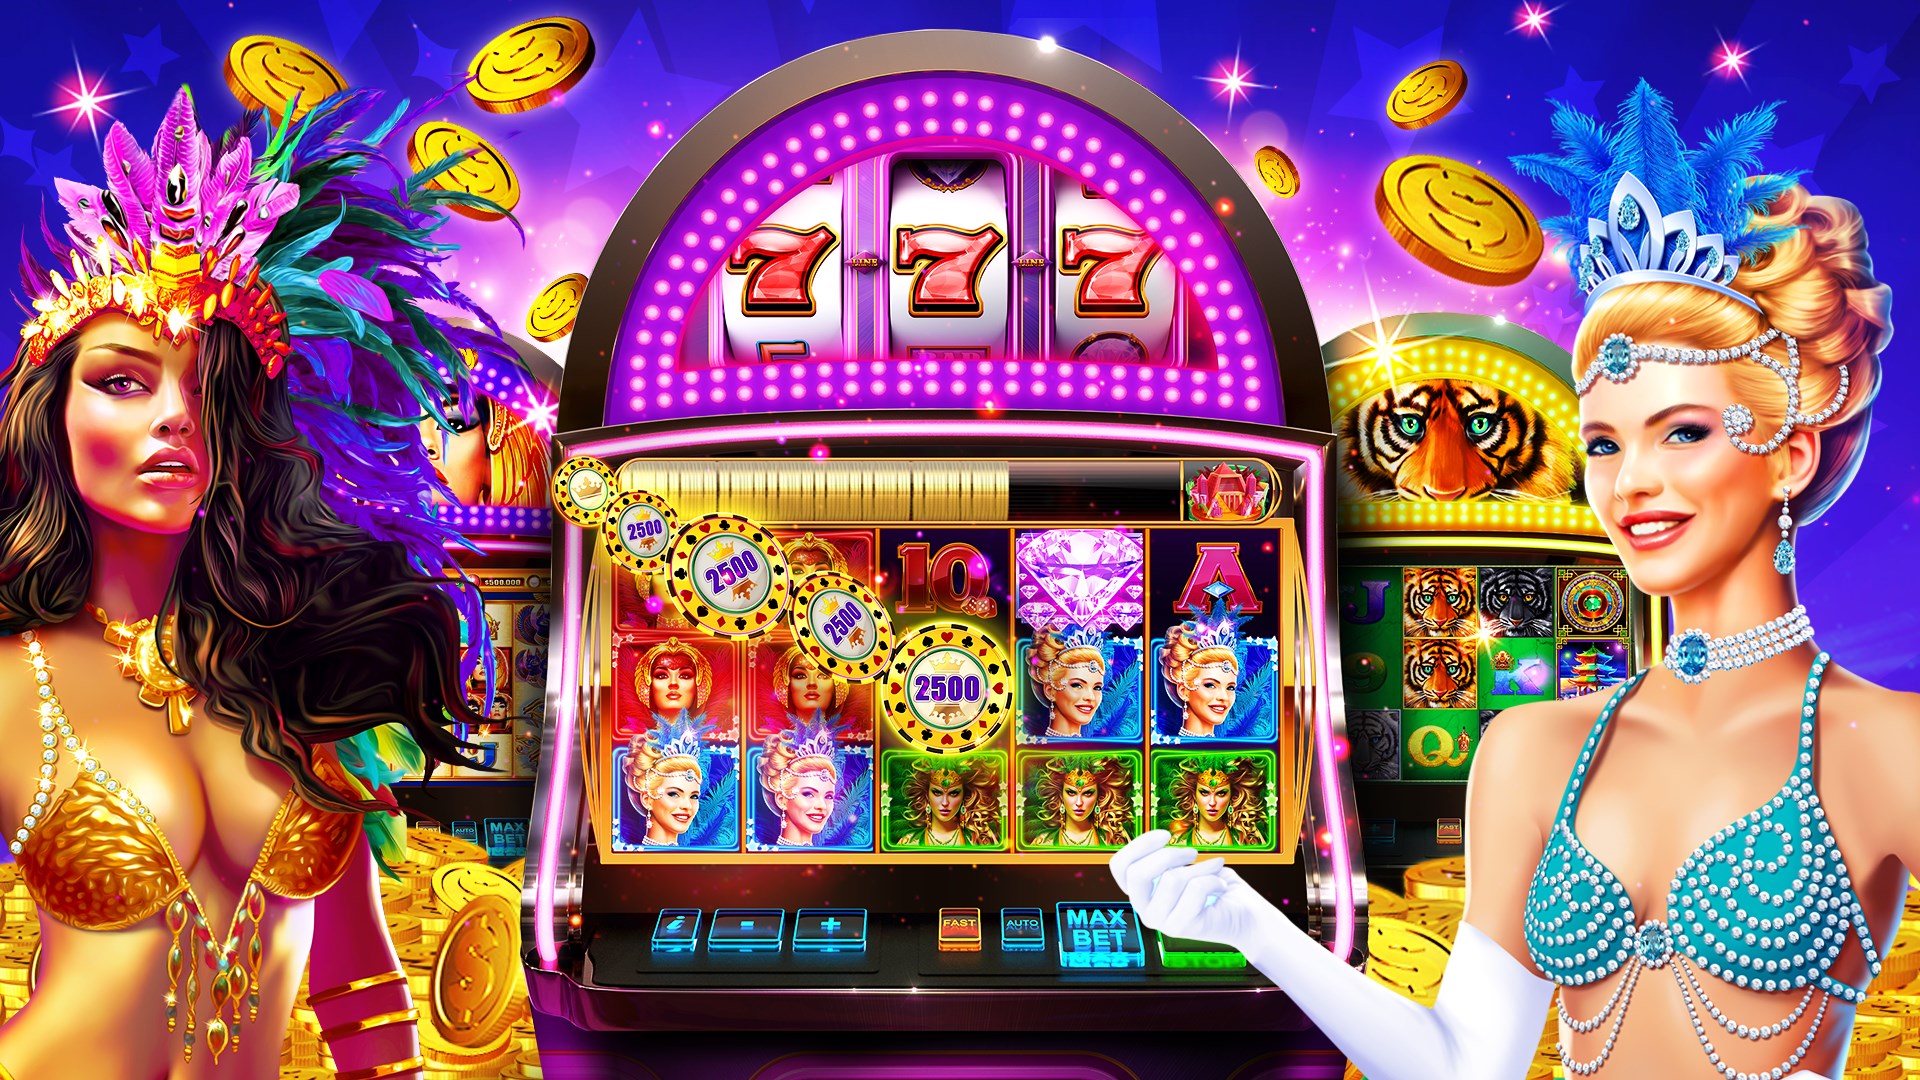 Eye of Horus Slot Review - Play Demo Game for Free Online